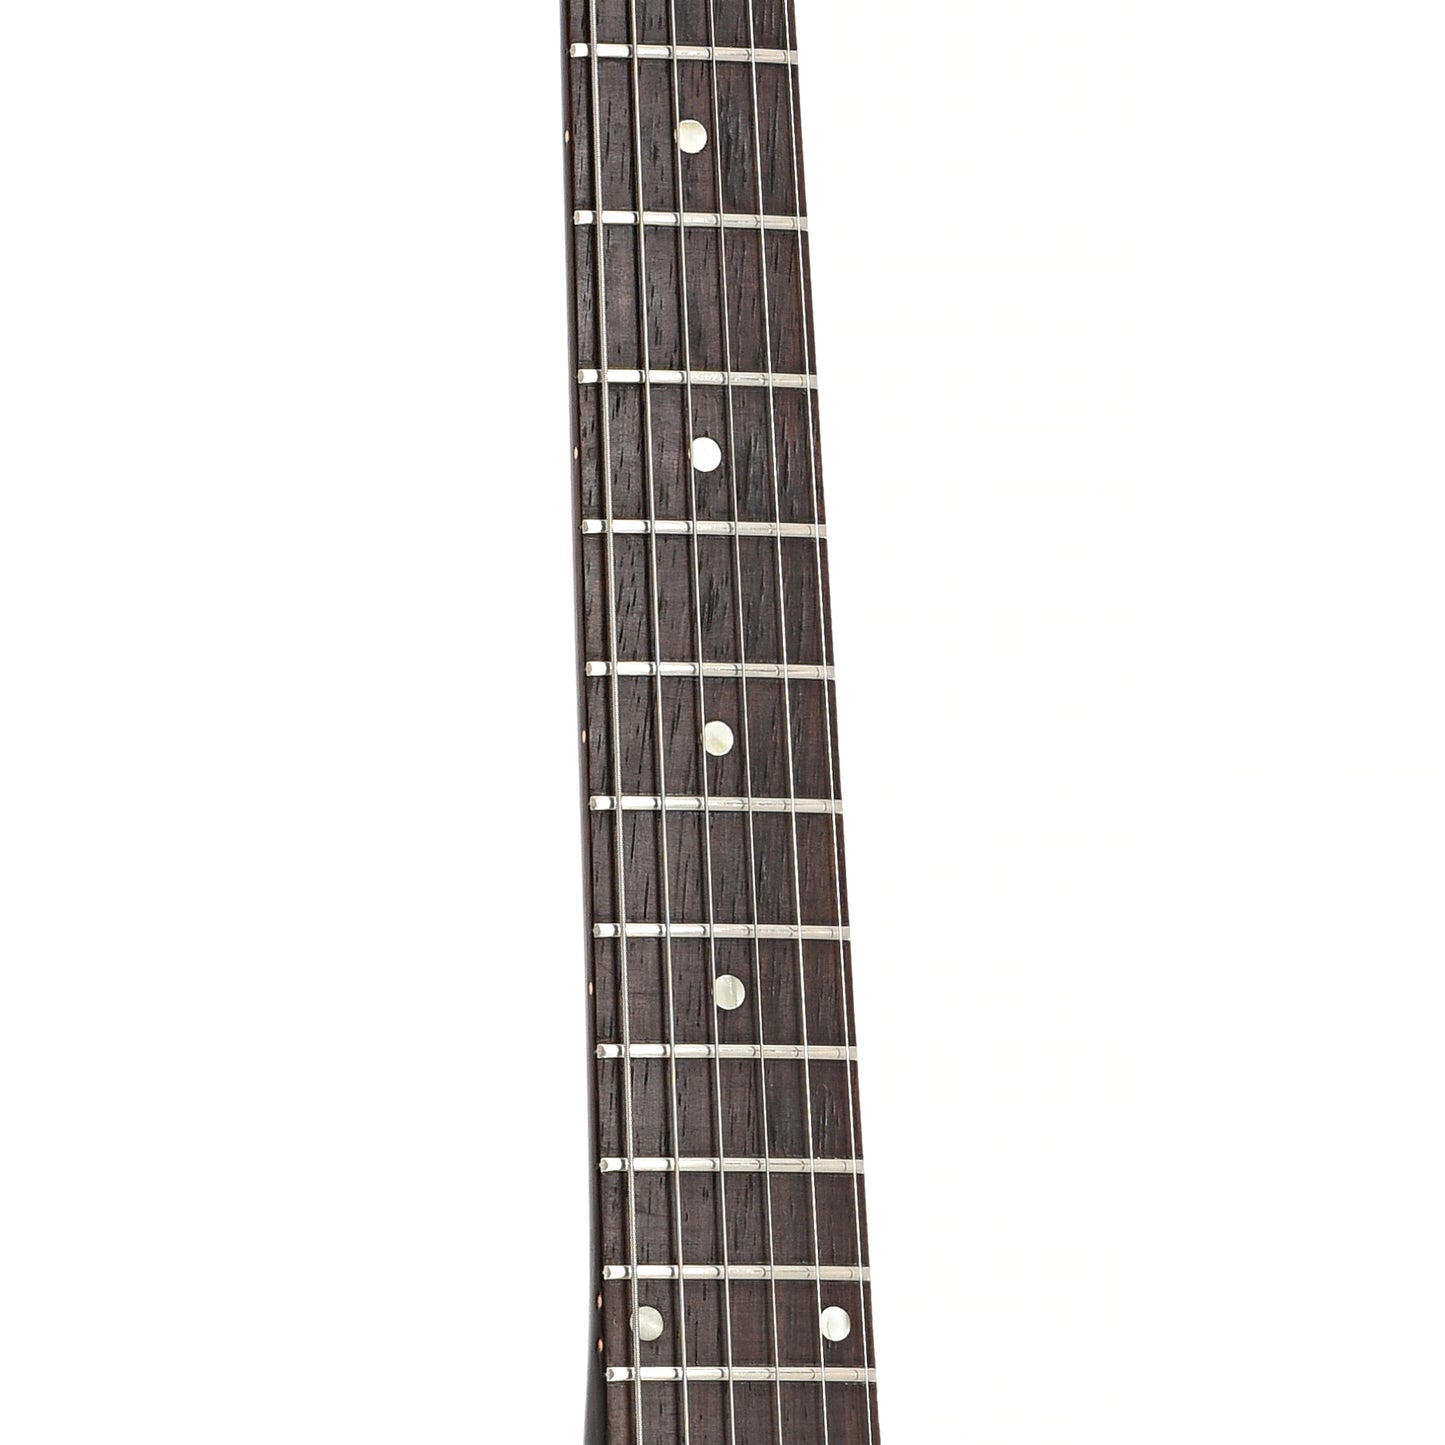 Fretboard of Gibson ES-150 Hollow Body Electric Guitar (1941)